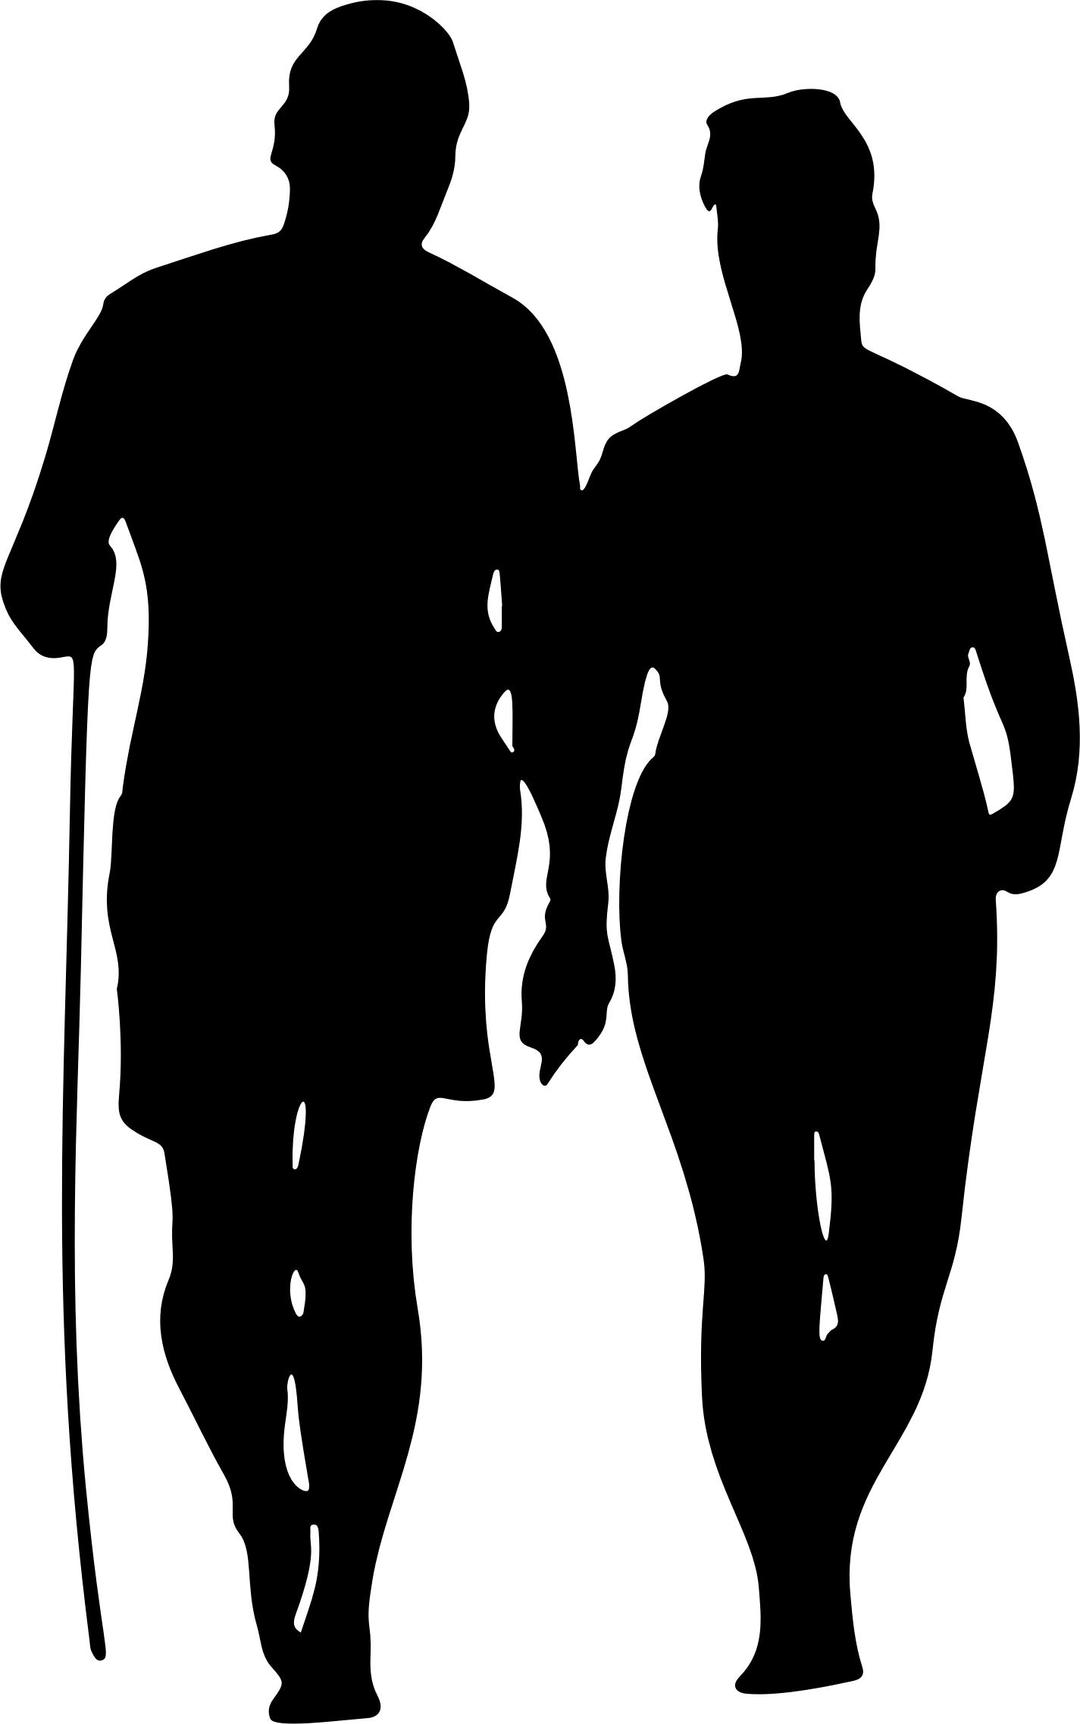 Couple Walking On Beach Silhouette png transparent